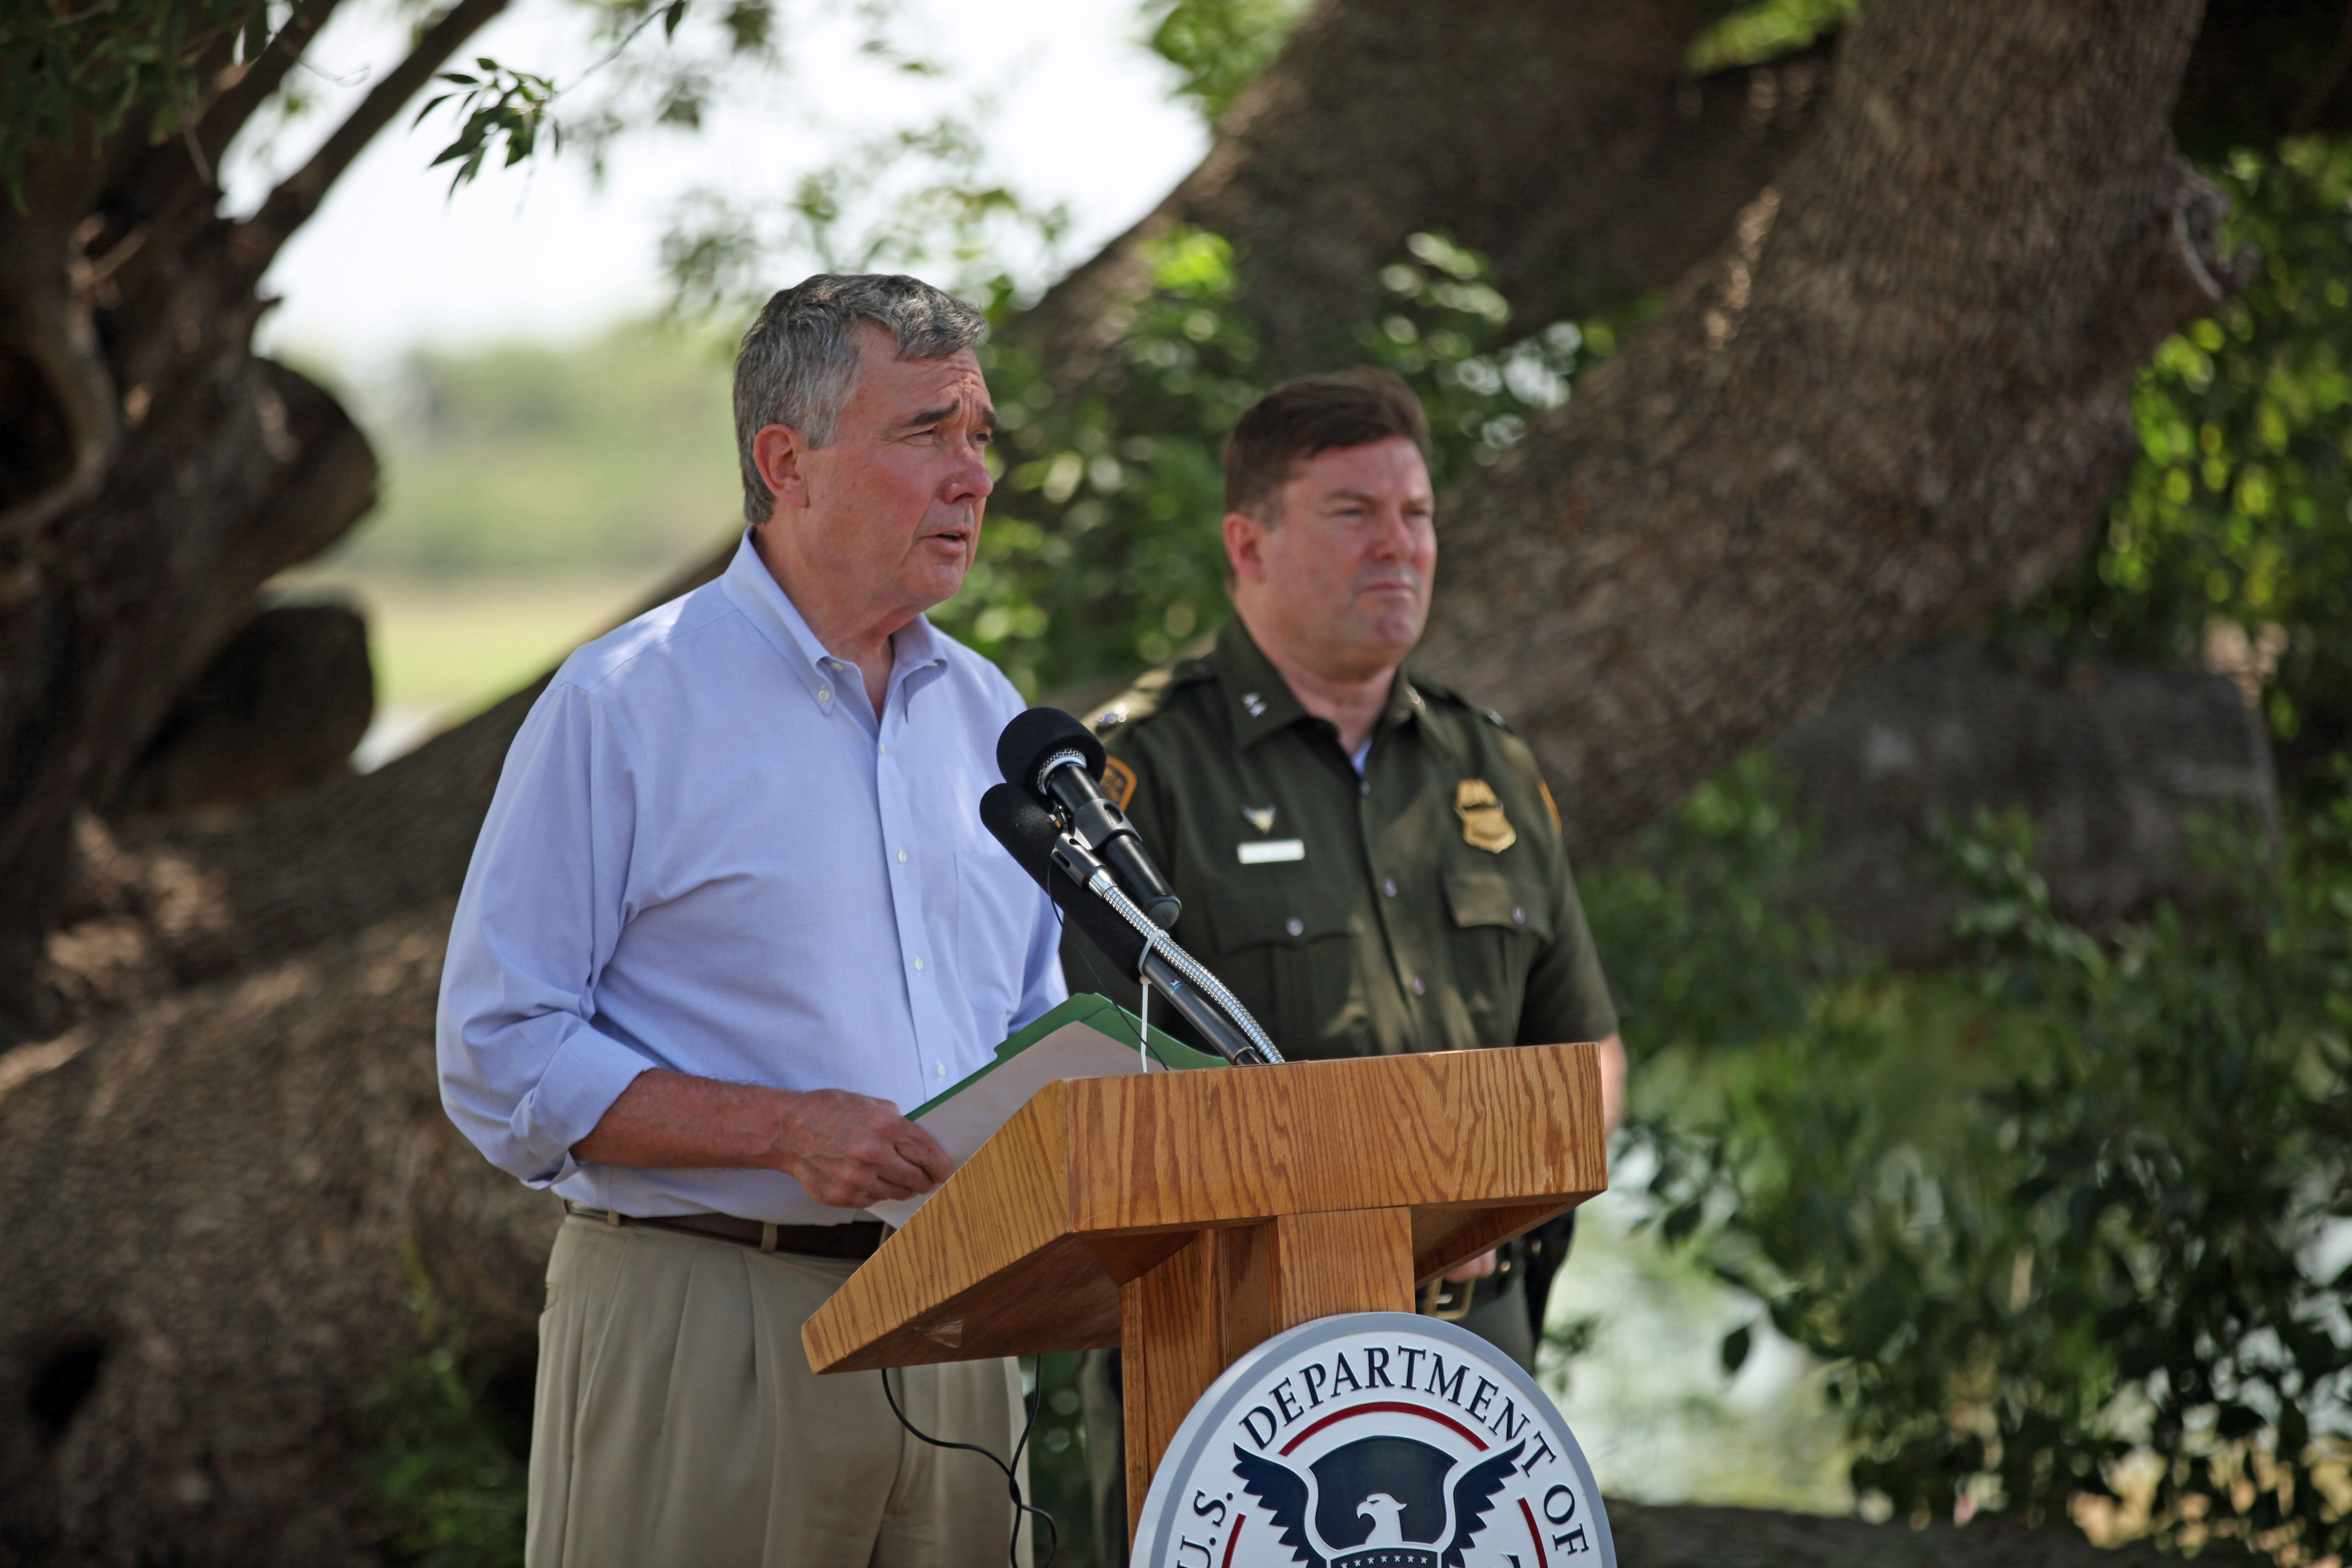 CBP Commissioner R. Gil Kerlikowske discussing the dangers and misinformation associated with the current influx of children attempting to enter the U.S. during a news conference on the banks of the Rio Grande River in Texas.